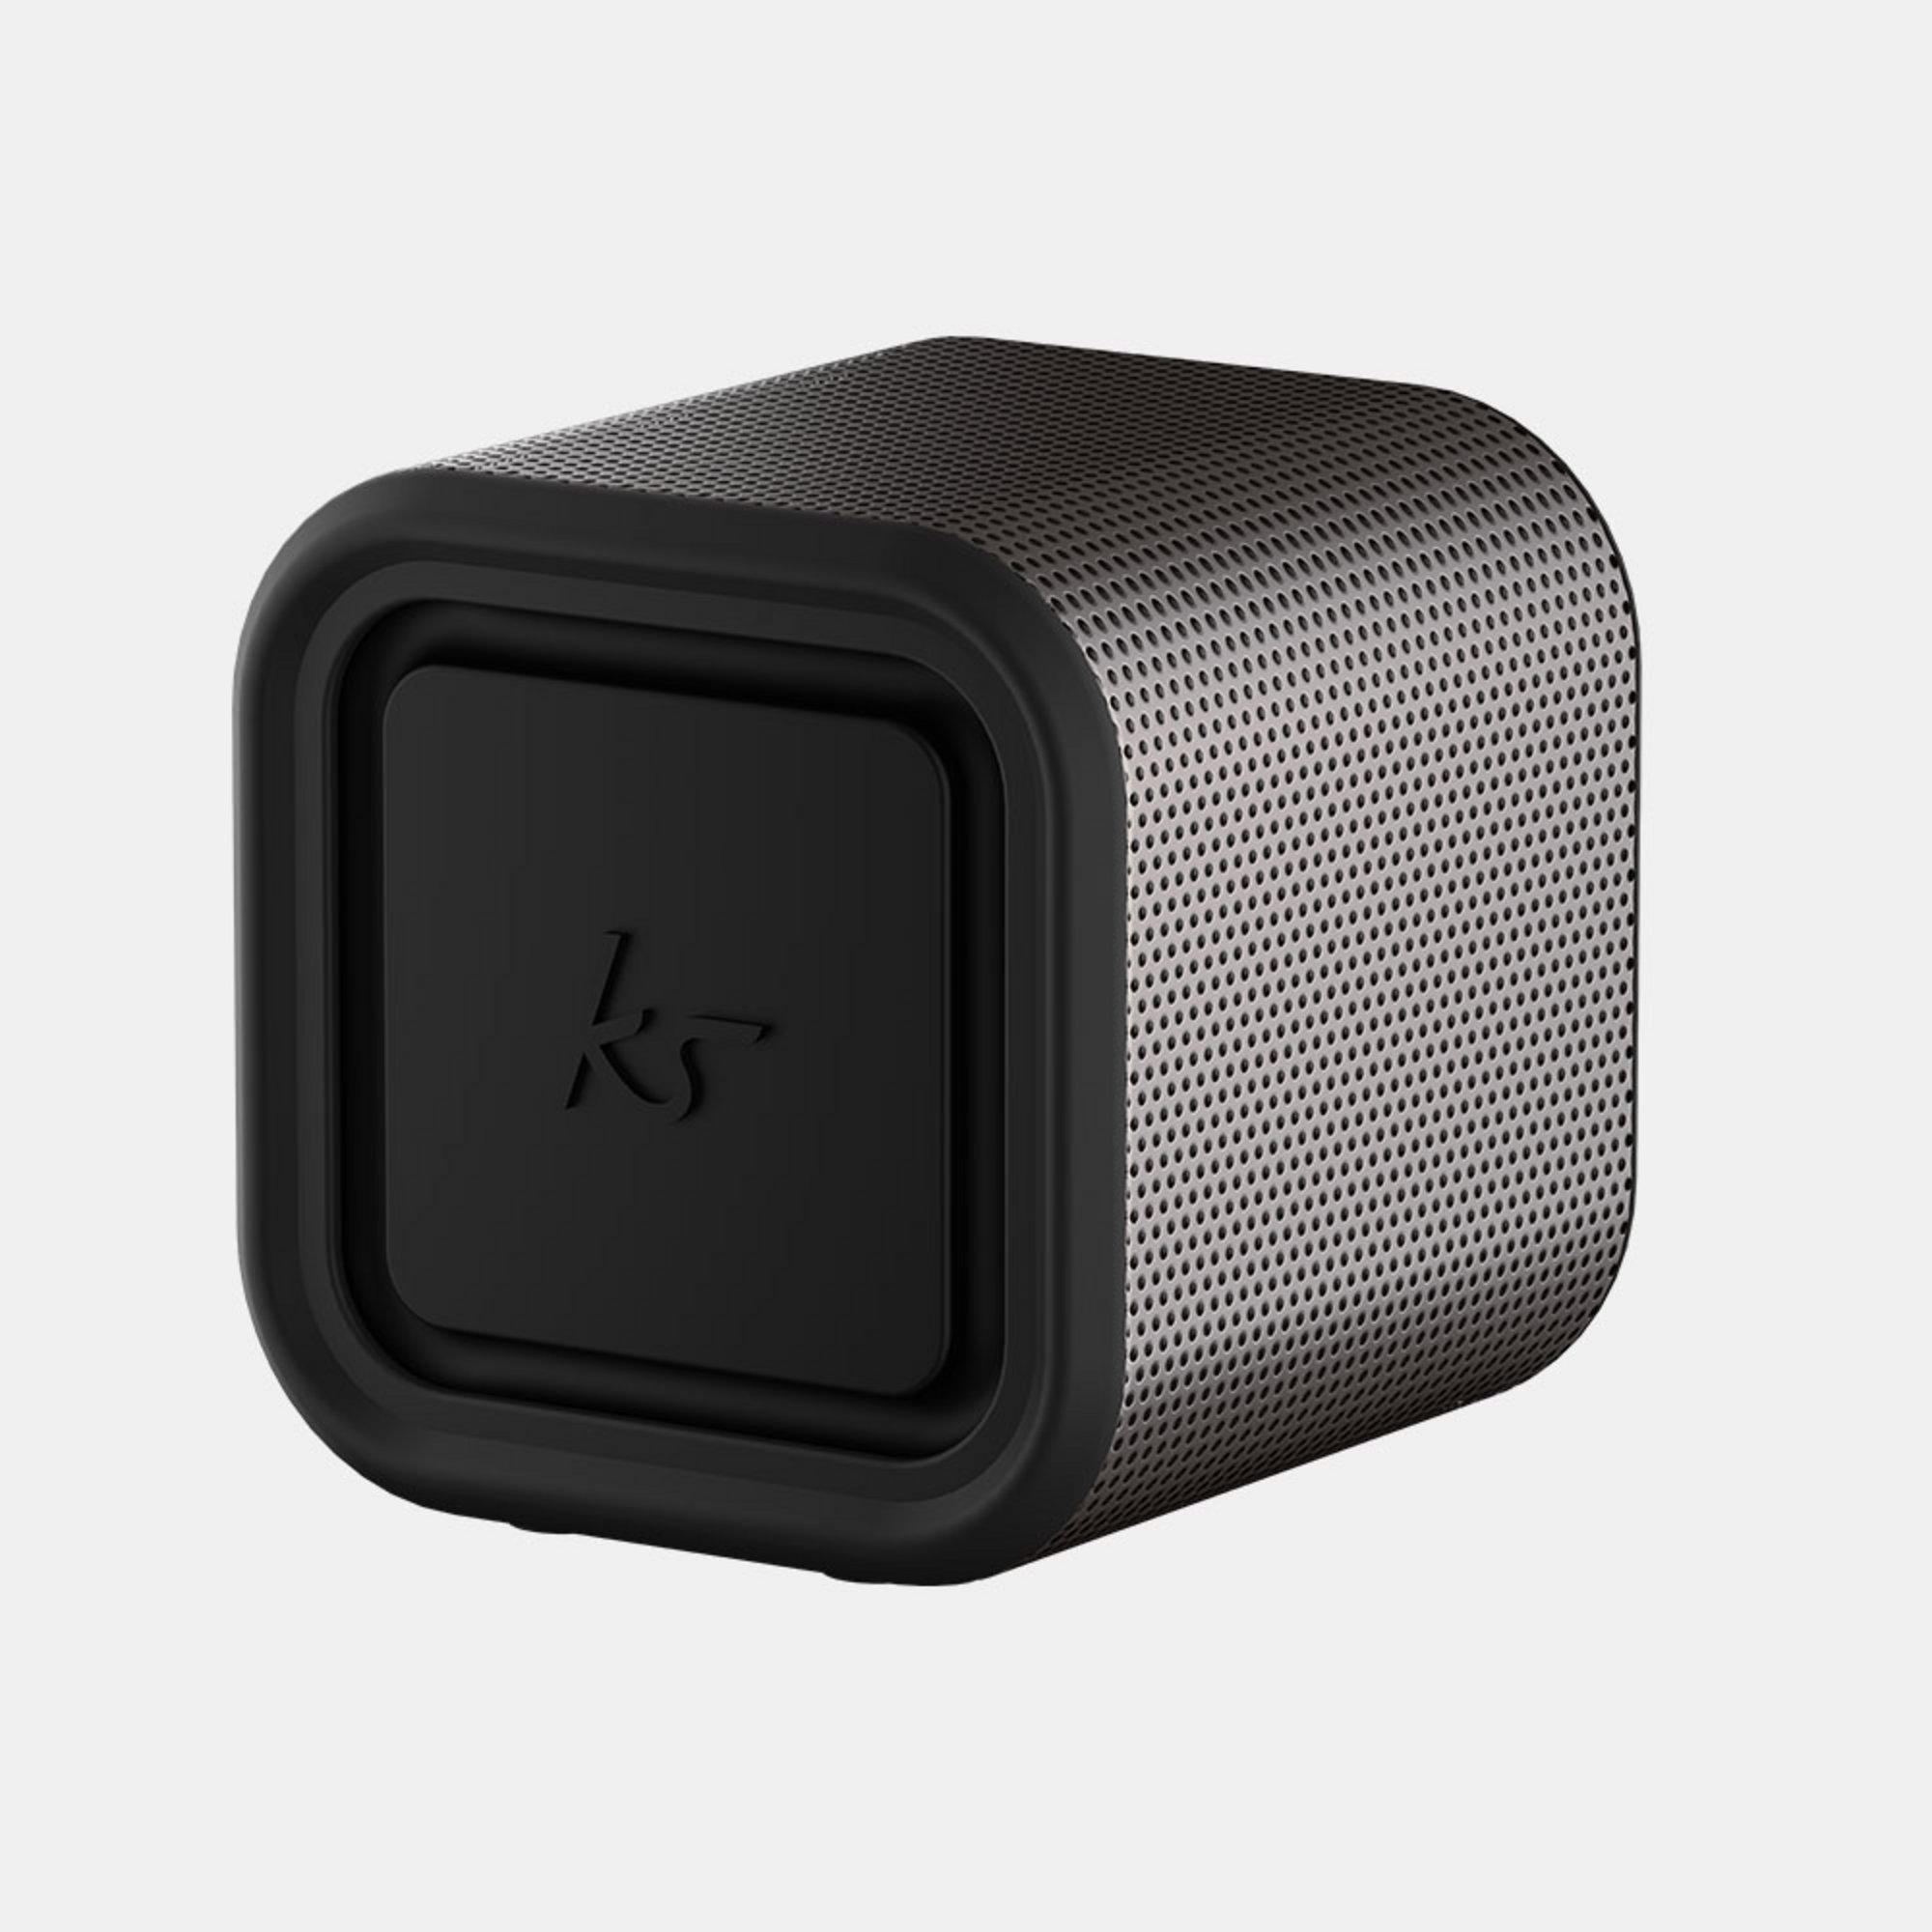 View more Boomcube 15 Bluetooth Speaker Rose Gold details